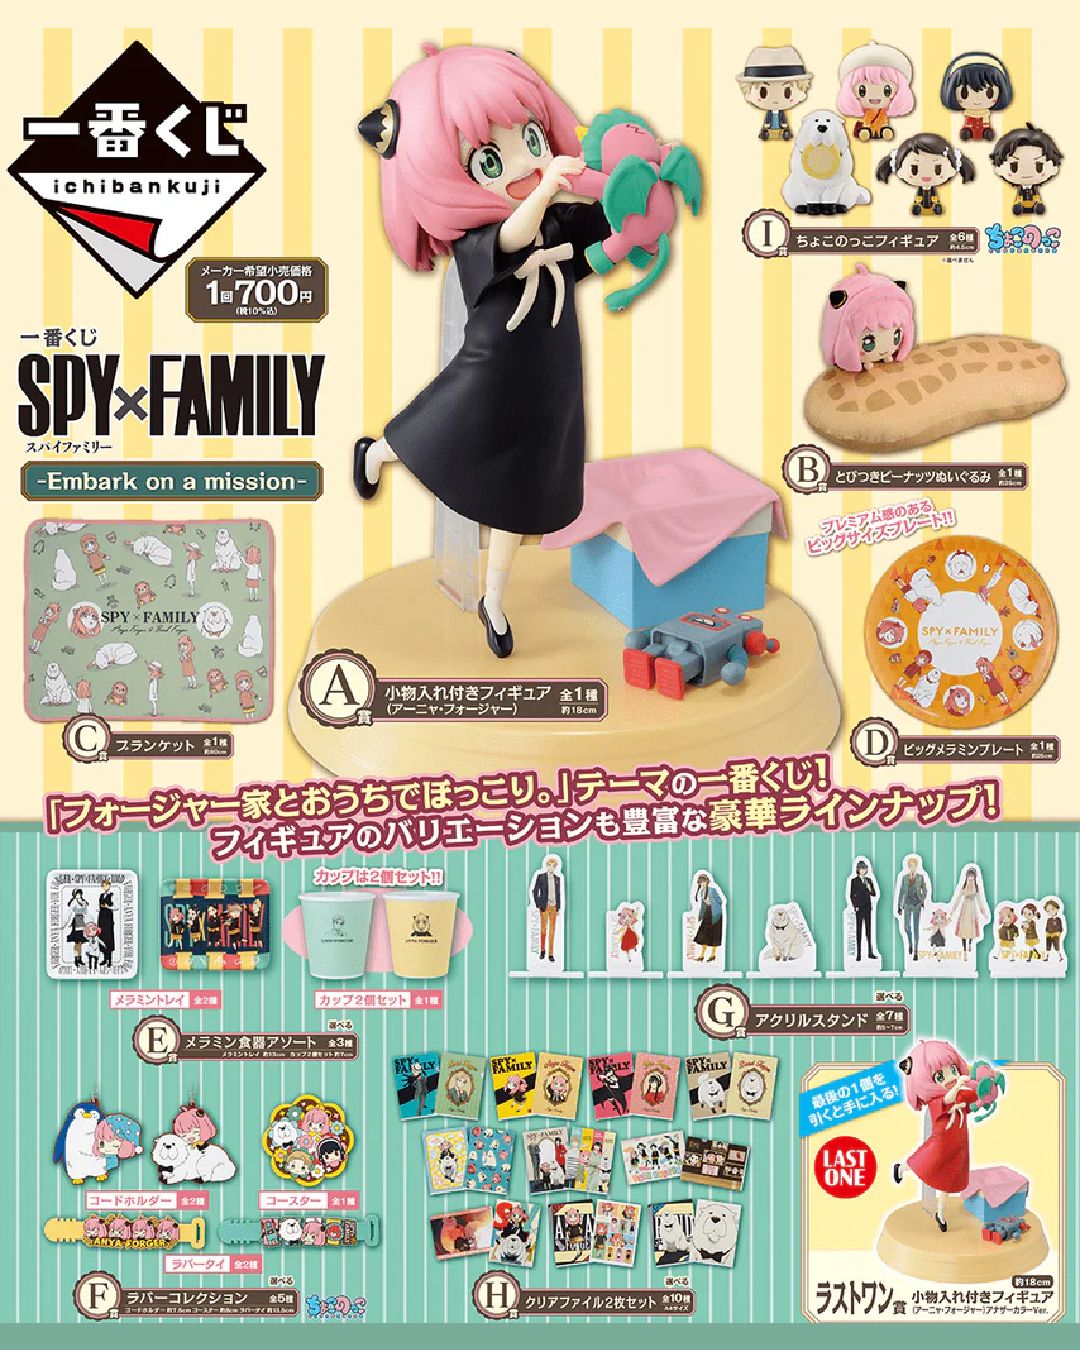 Kuji Spy X Family  Embark on a Mission